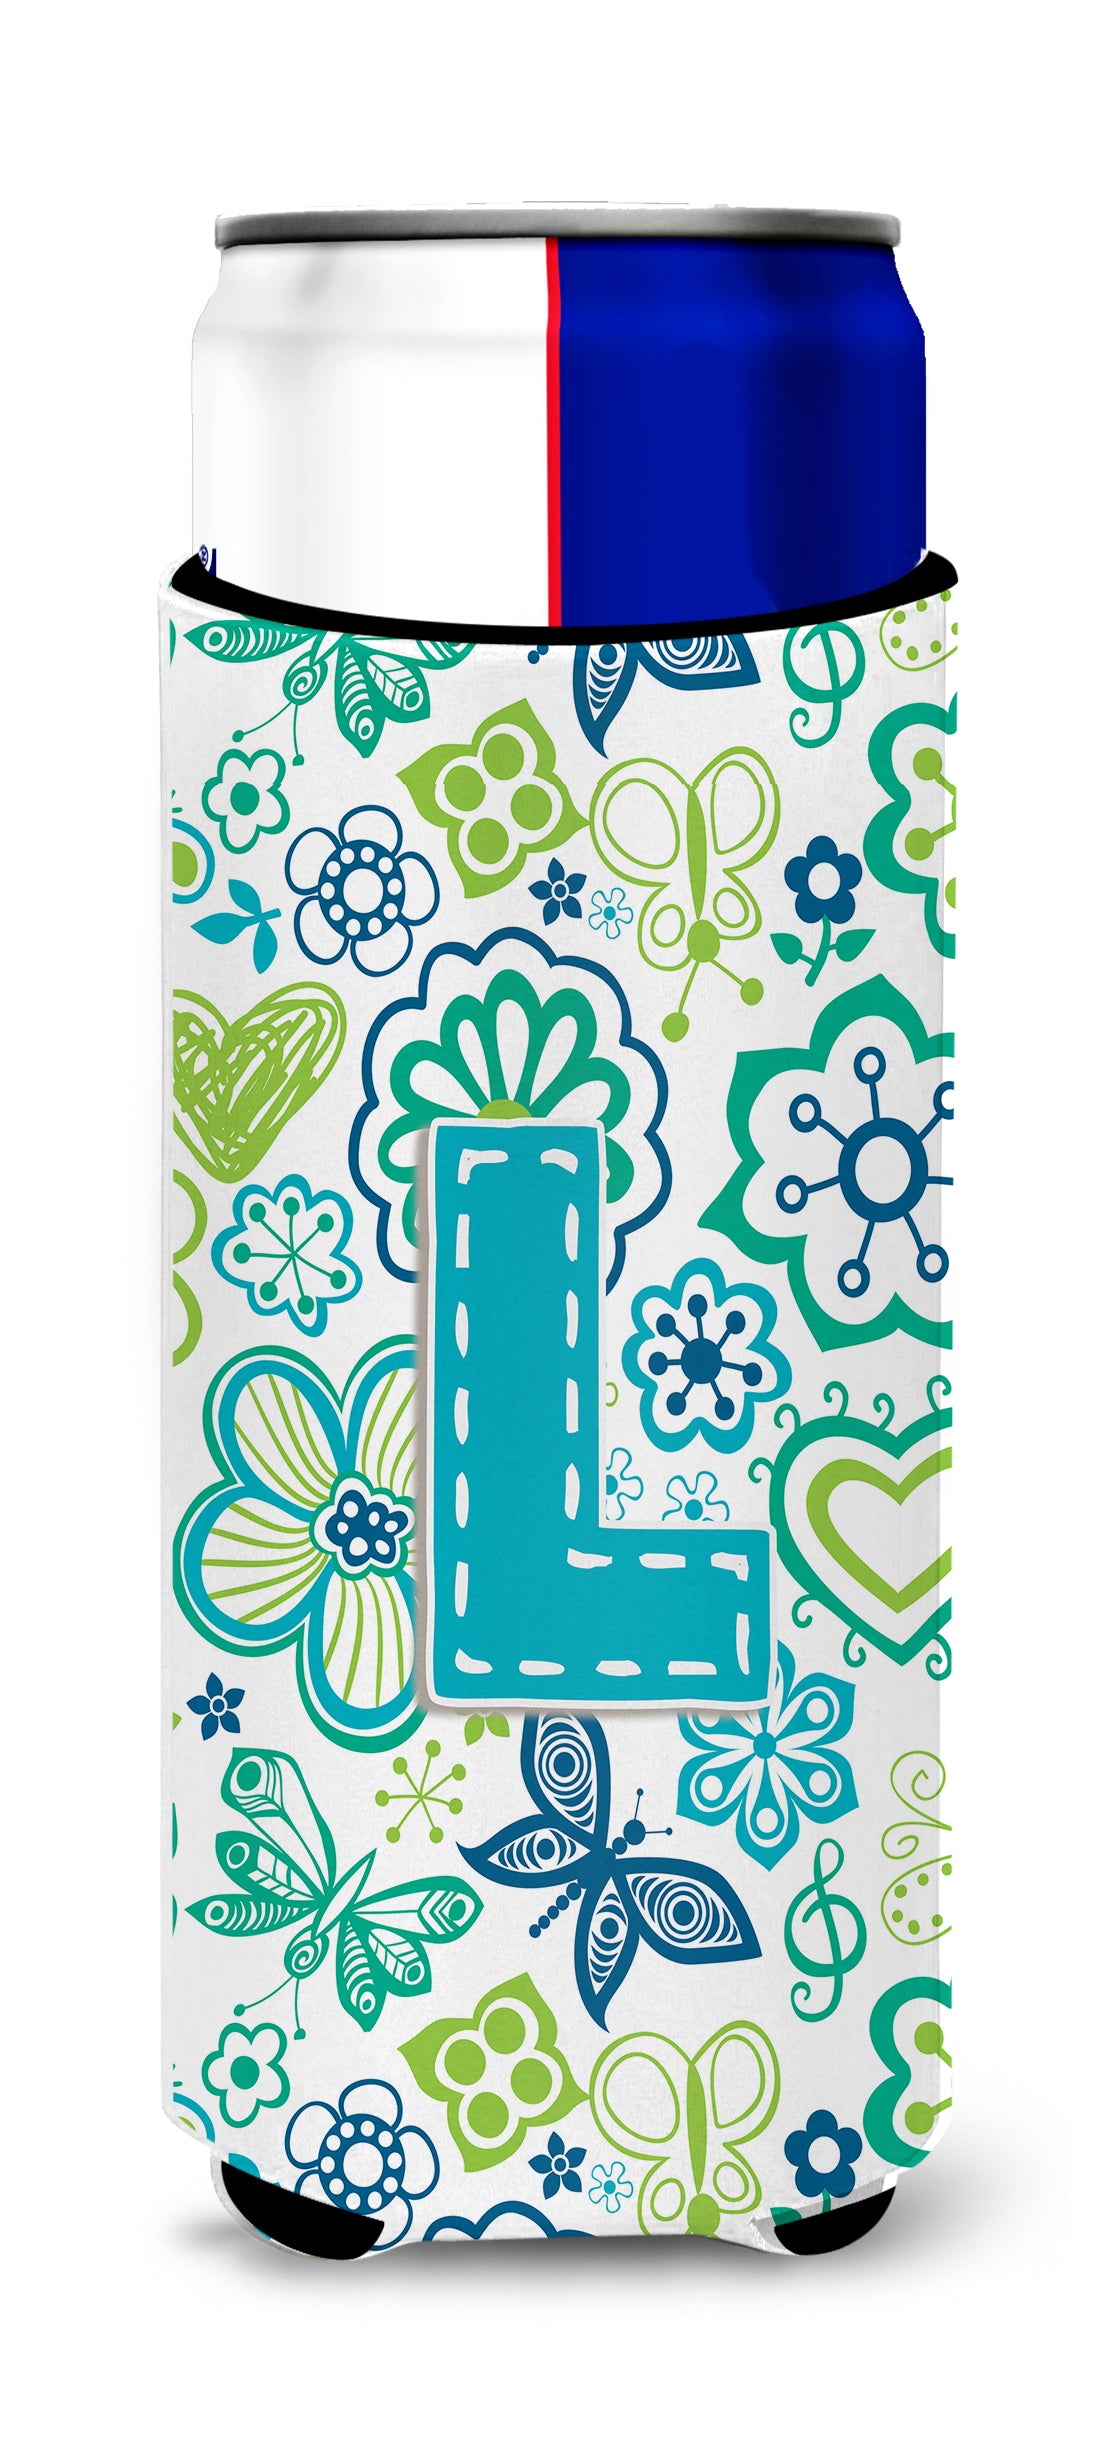 Letter L Flowers and Butterflies Teal Blue Ultra Beverage Insulators for slim cans CJ2006-LMUK